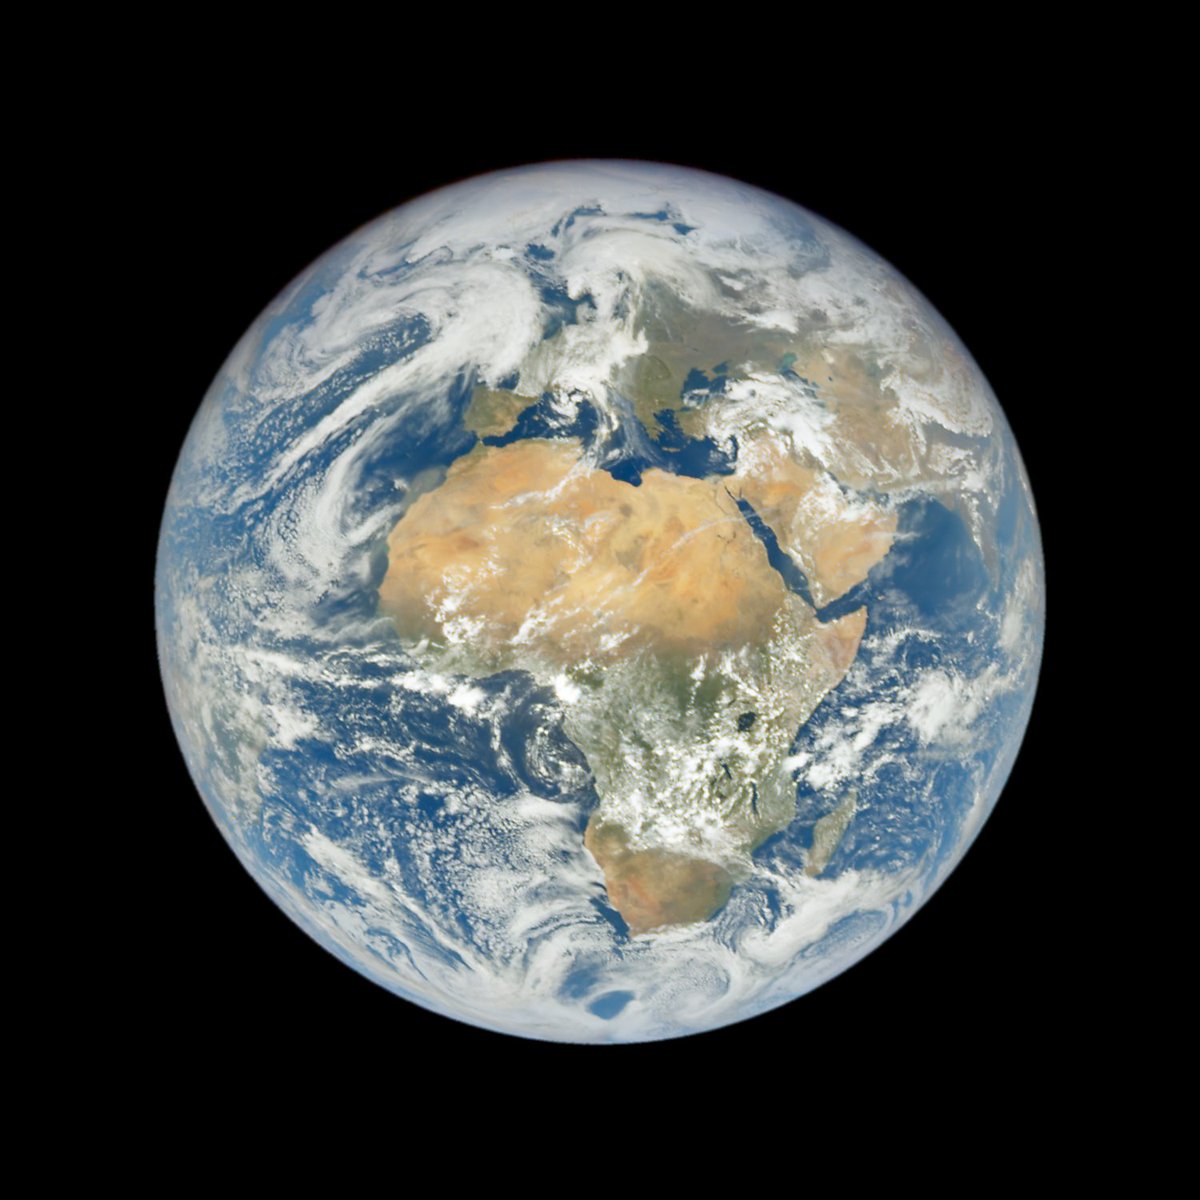 11:01 on Wednesday April 10th, over Niger